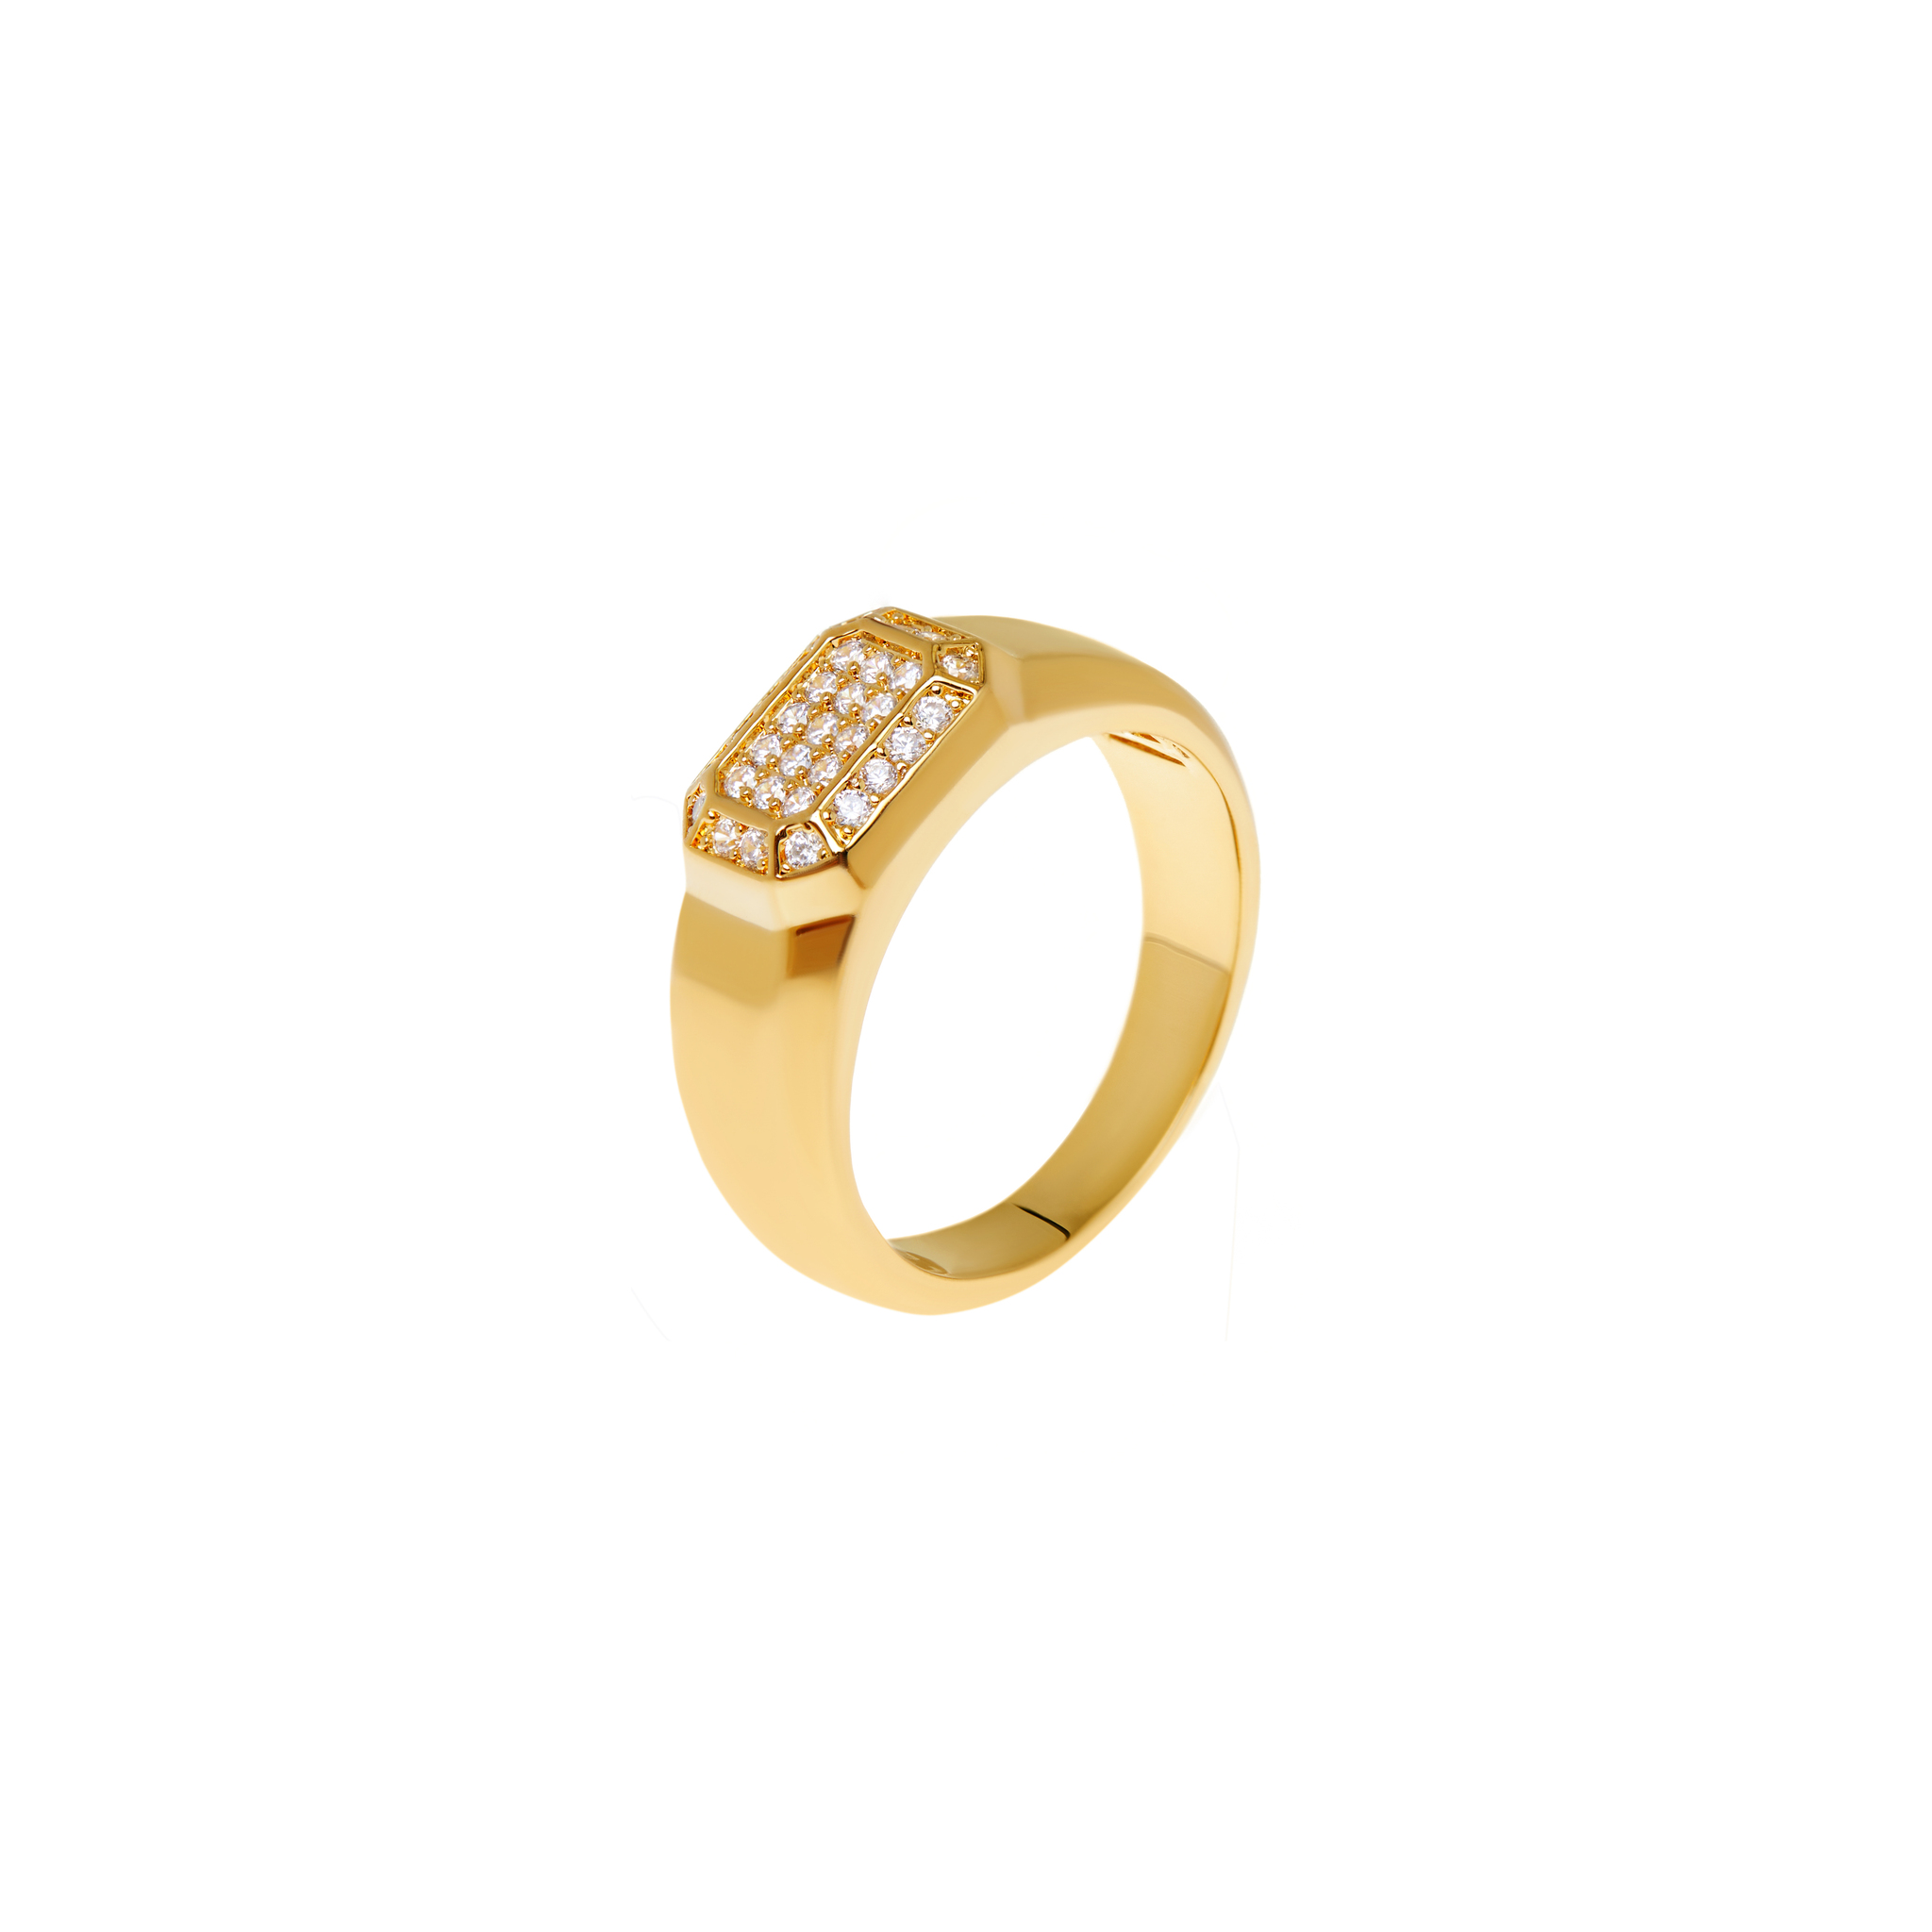 Faceted Diamond Signet Ring - Gold